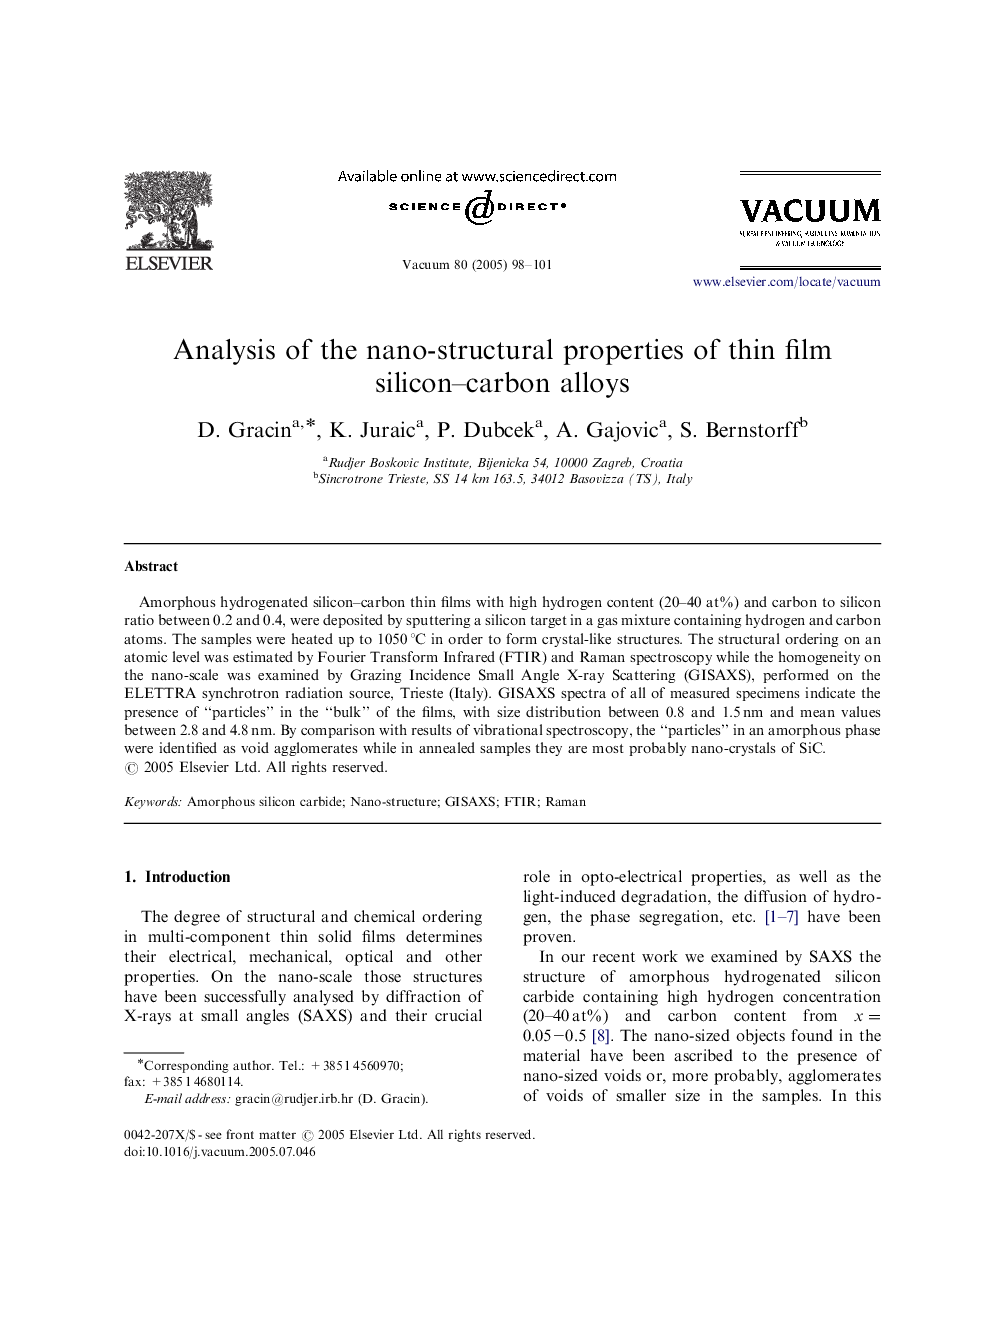 Analysis of the nano-structural properties of thin film silicon-carbon alloys